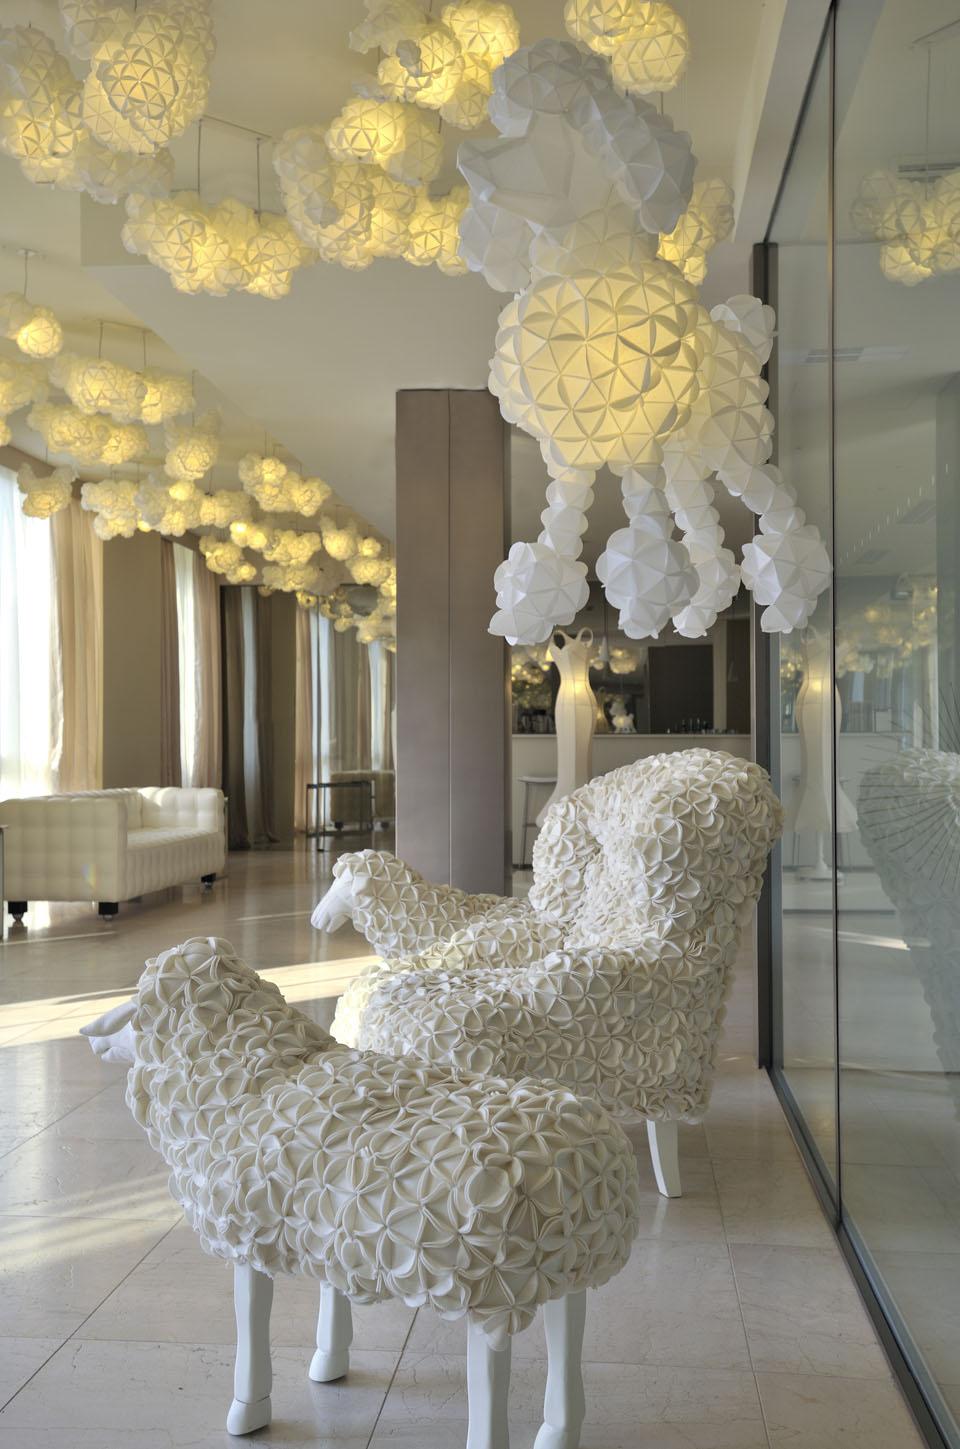 Sheep sculptures and poodle-shaped lamps welcome guests at the entrance.